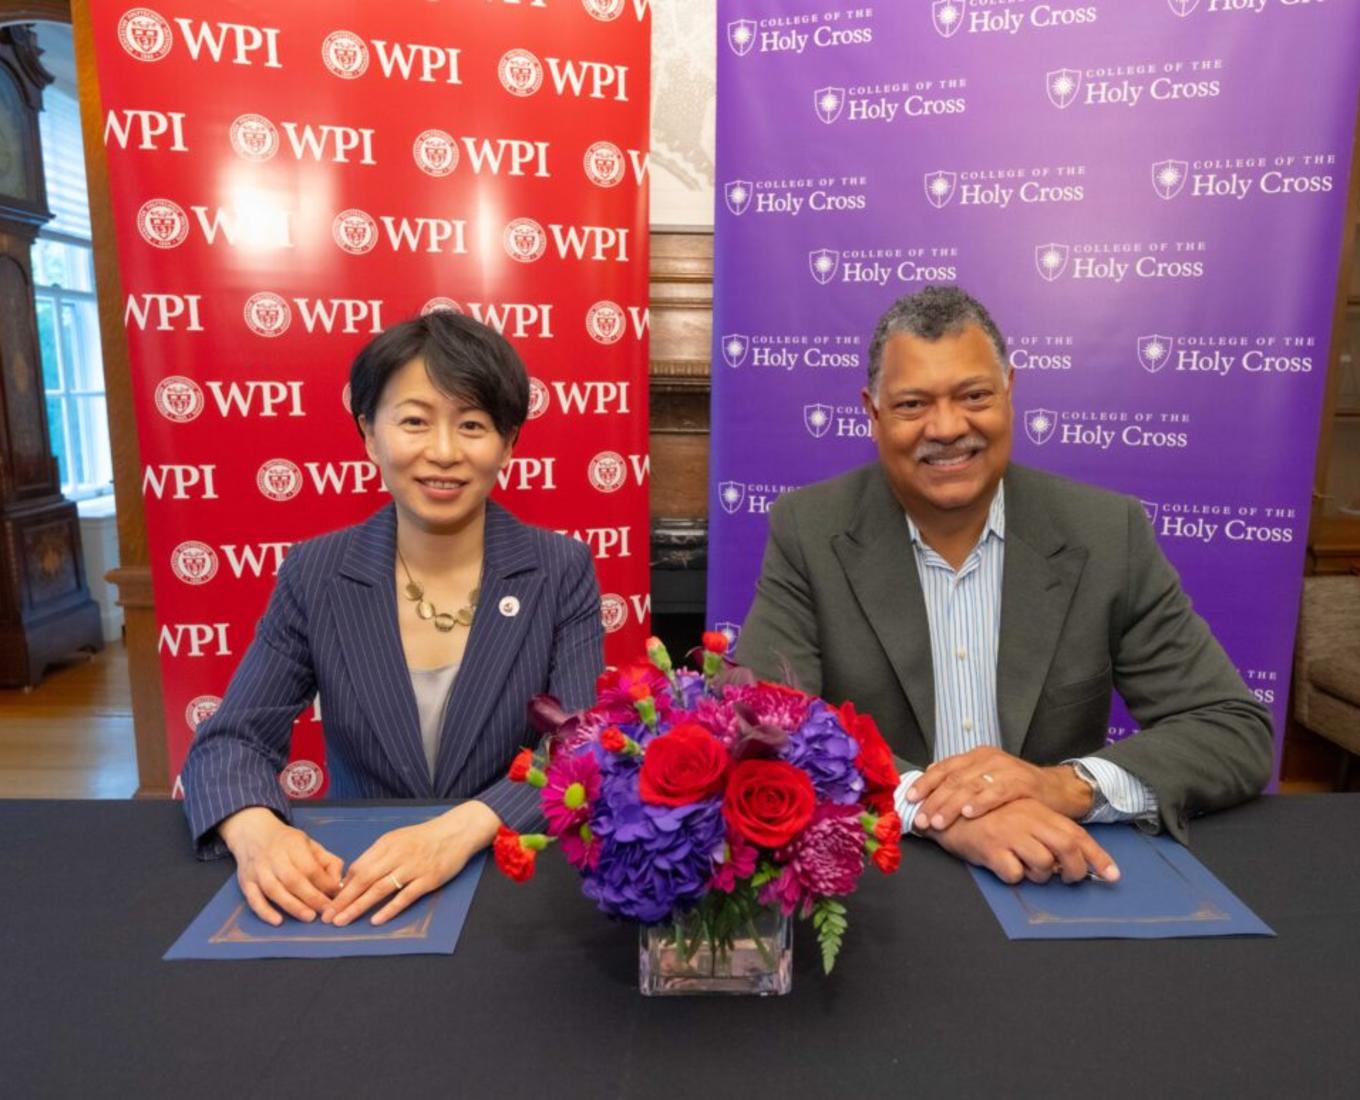 WPI President Grace Wang and Holy Cross President Vincent D. Rougeau. Photo courtesy of WPI